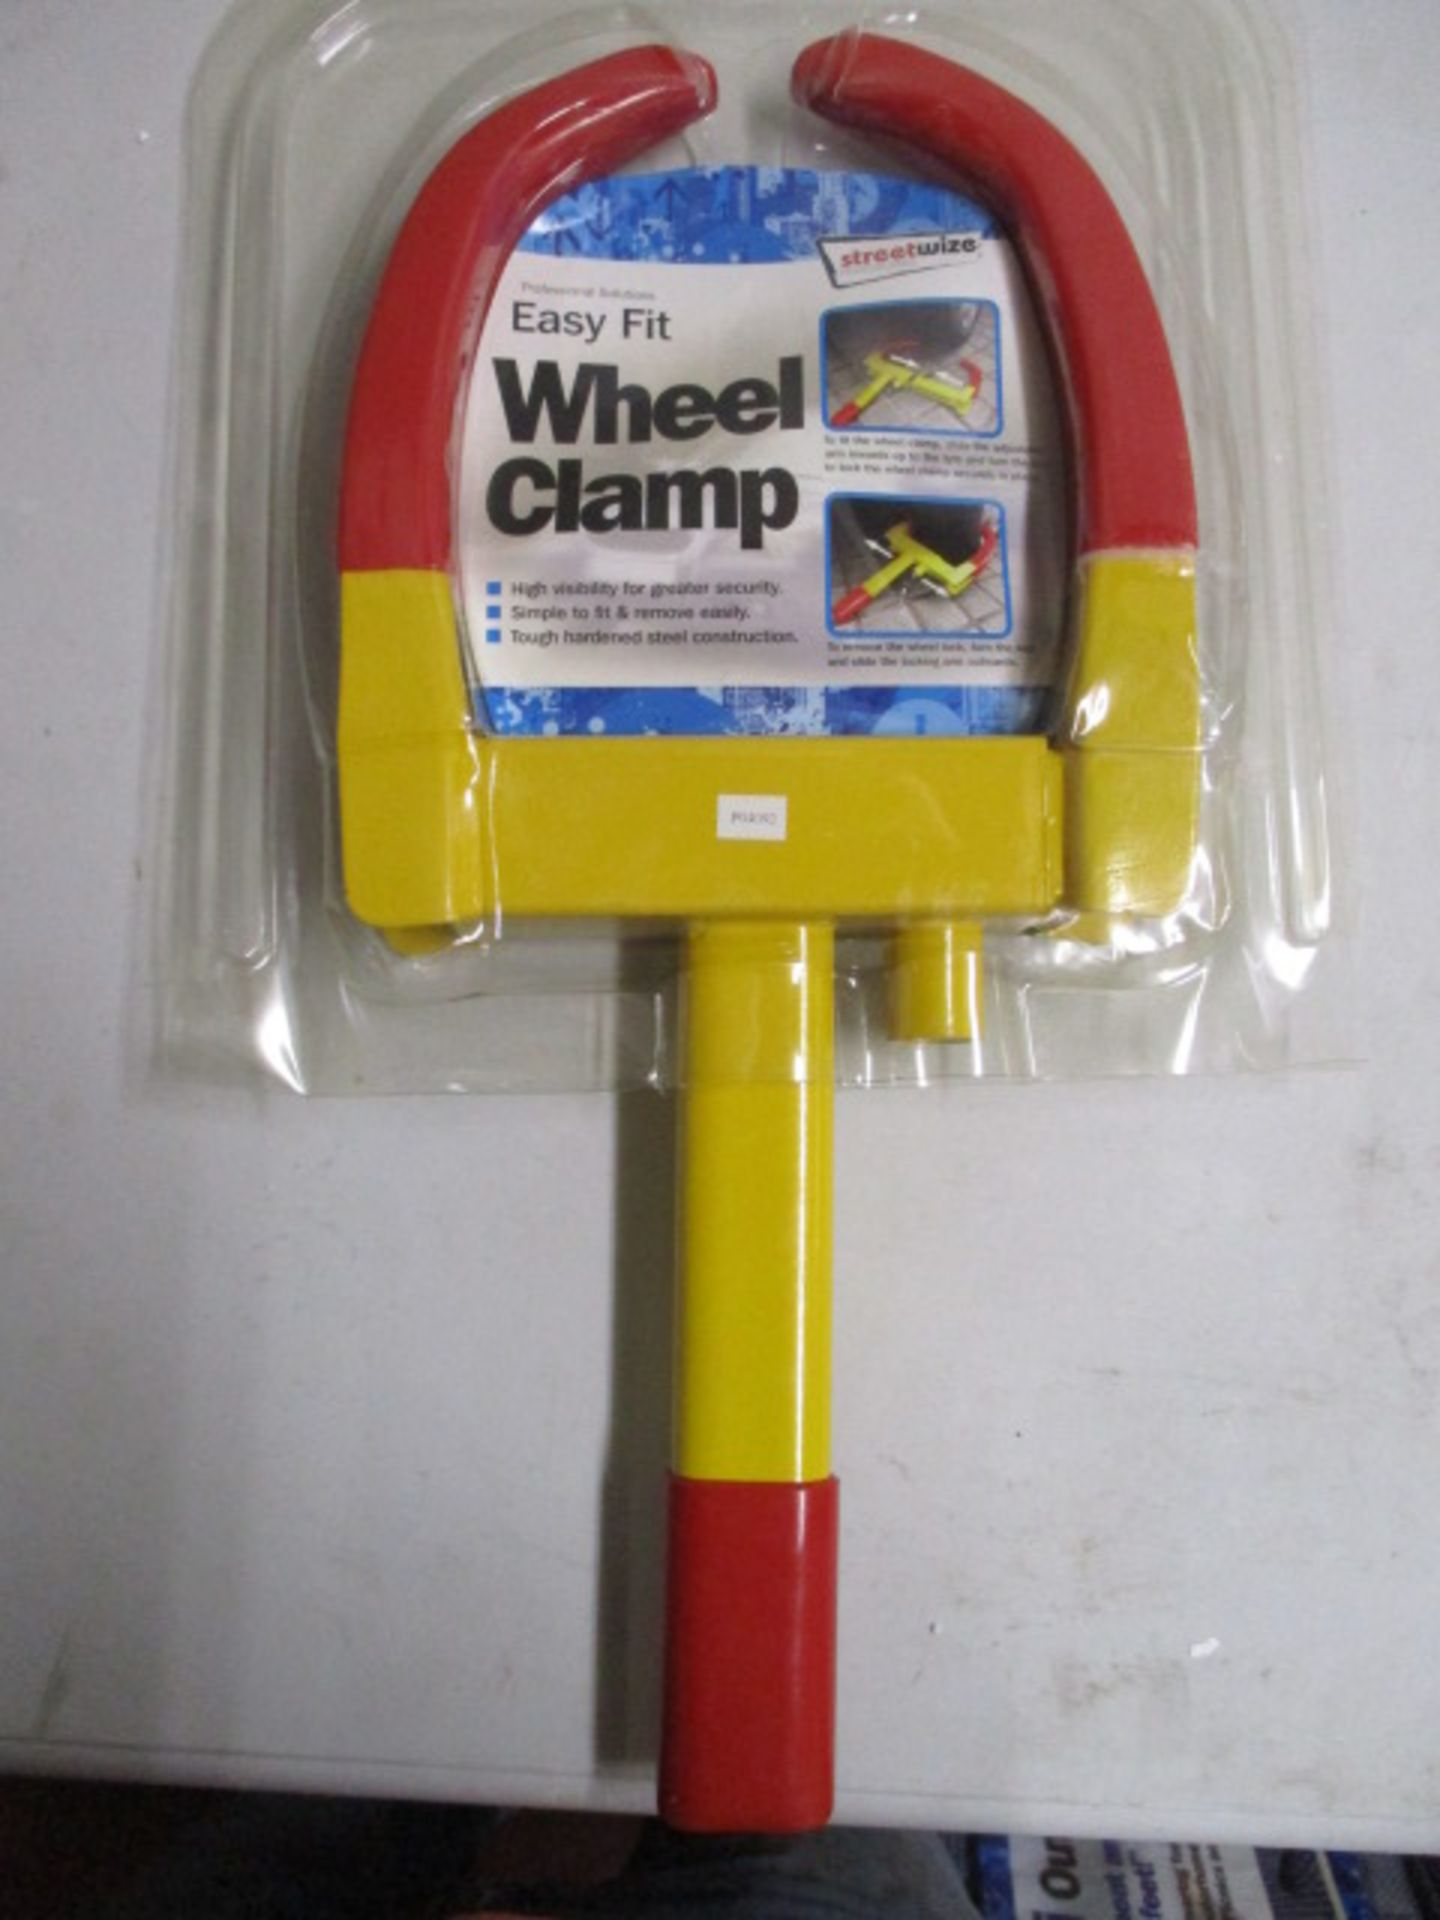 Brand new easy fit wheel clamp with keys